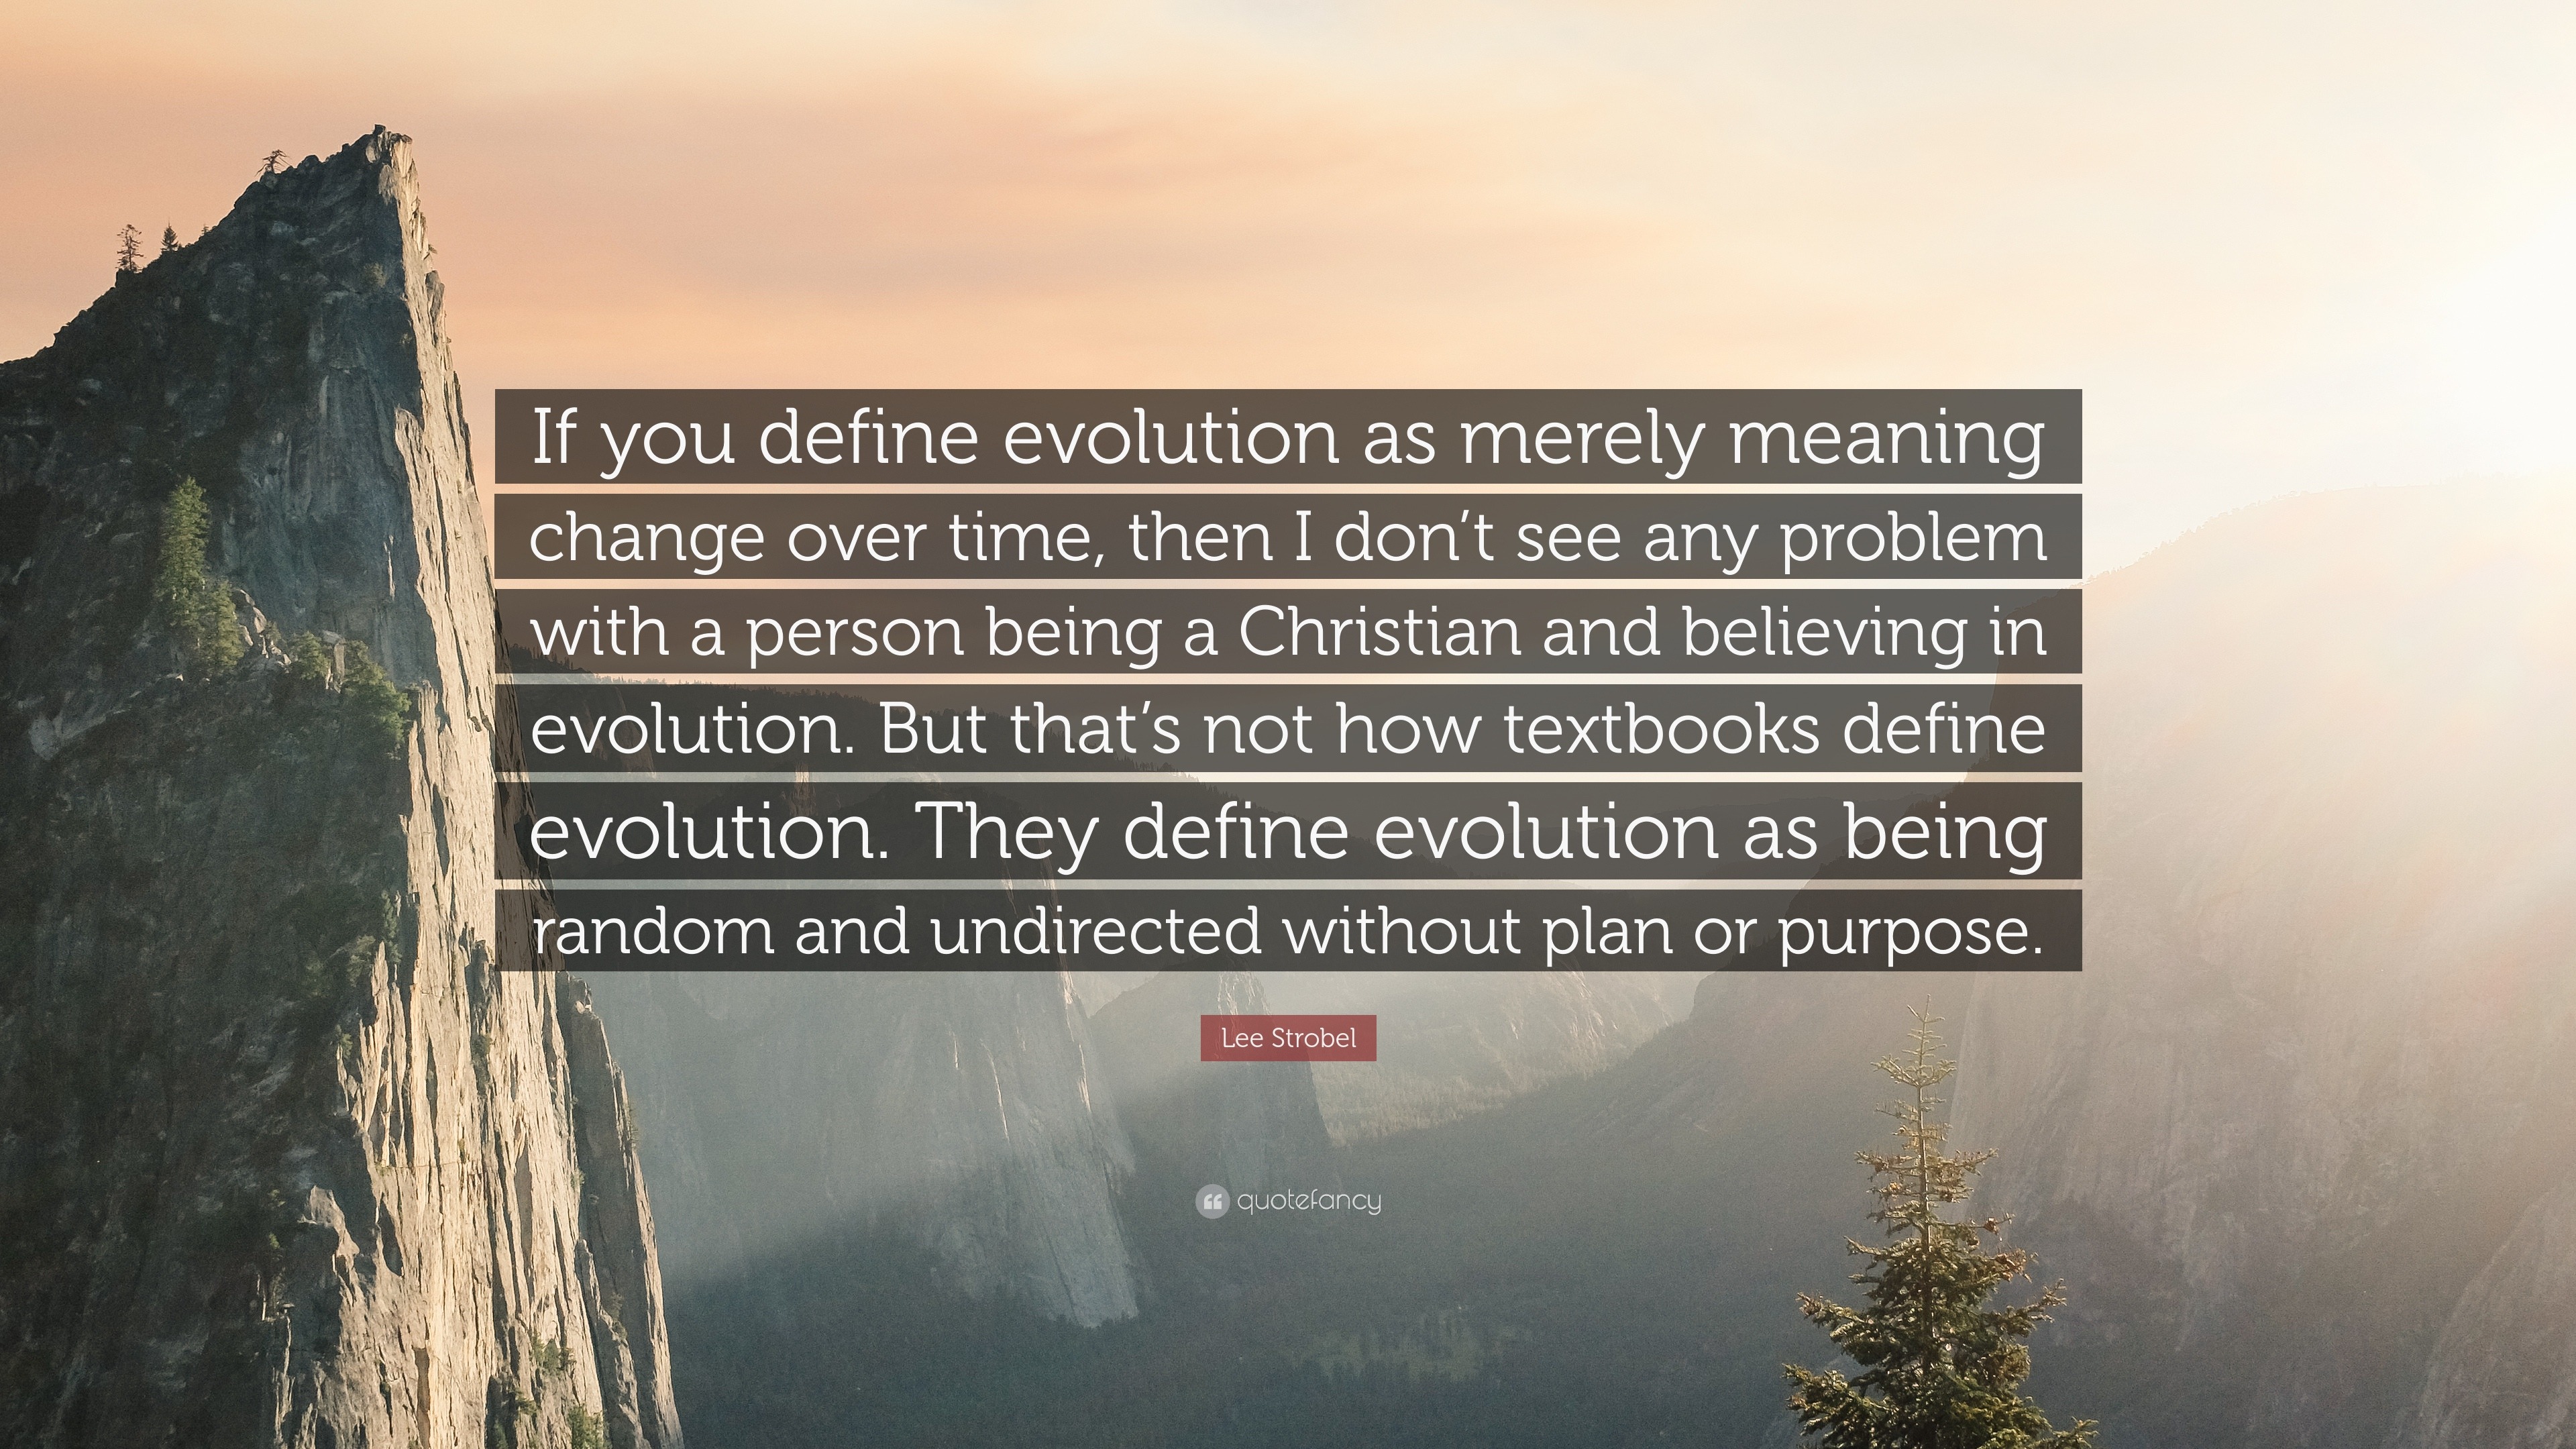 Lee Strobel quote: If you define evolution as merely meaning change over  time